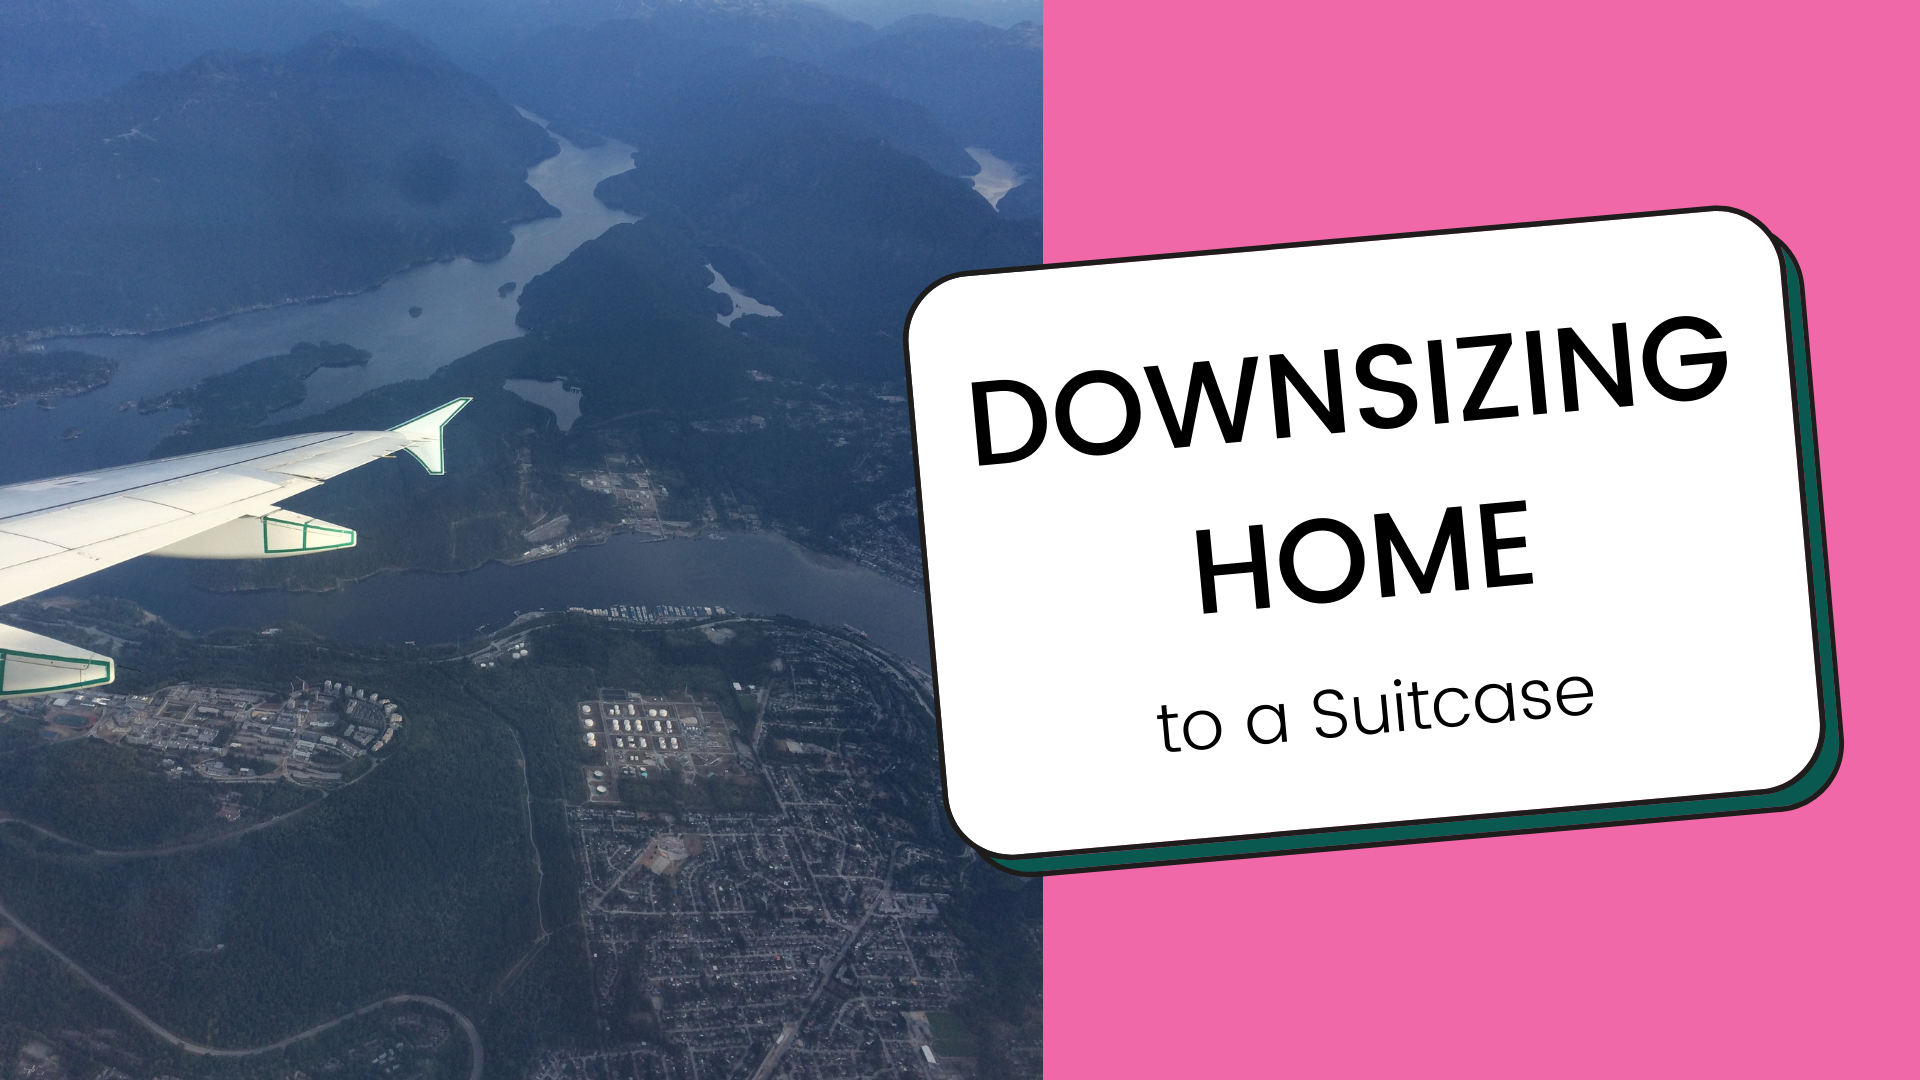 Downsizing Home to a Suitcase